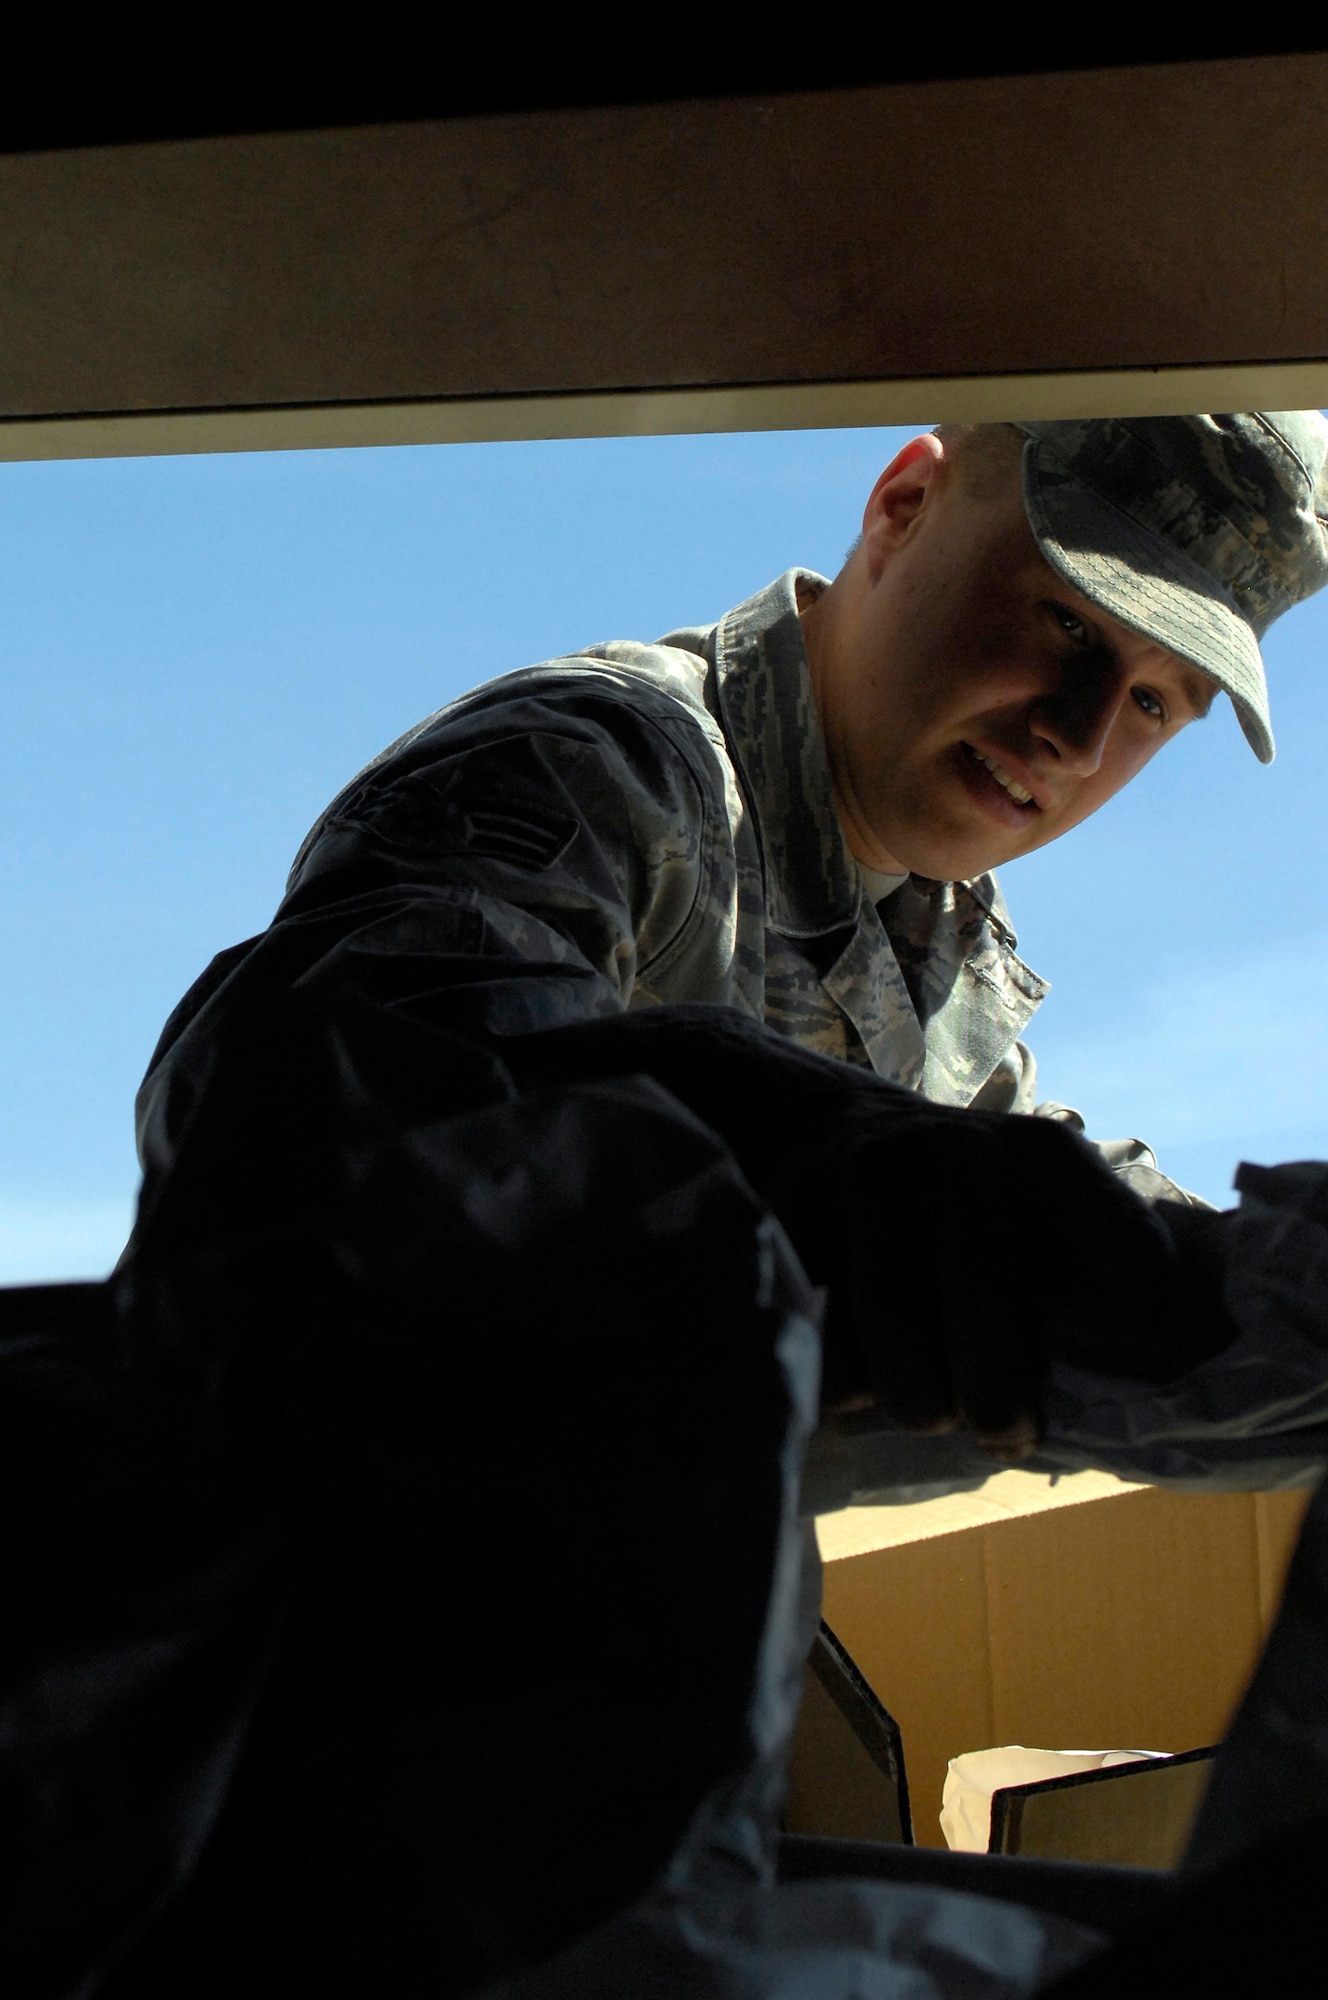 Senior Airman Jason Schuler, 509th Maintenance Squadron, drops packing paper into a  recycling bin at the Whiteman Recycling Center April 12, 2010. The recycling center has several bins in place to collect recyclable material 24 hours a day. (U.S. Air Force Photo/Staff Sgt. Jason Barebo)